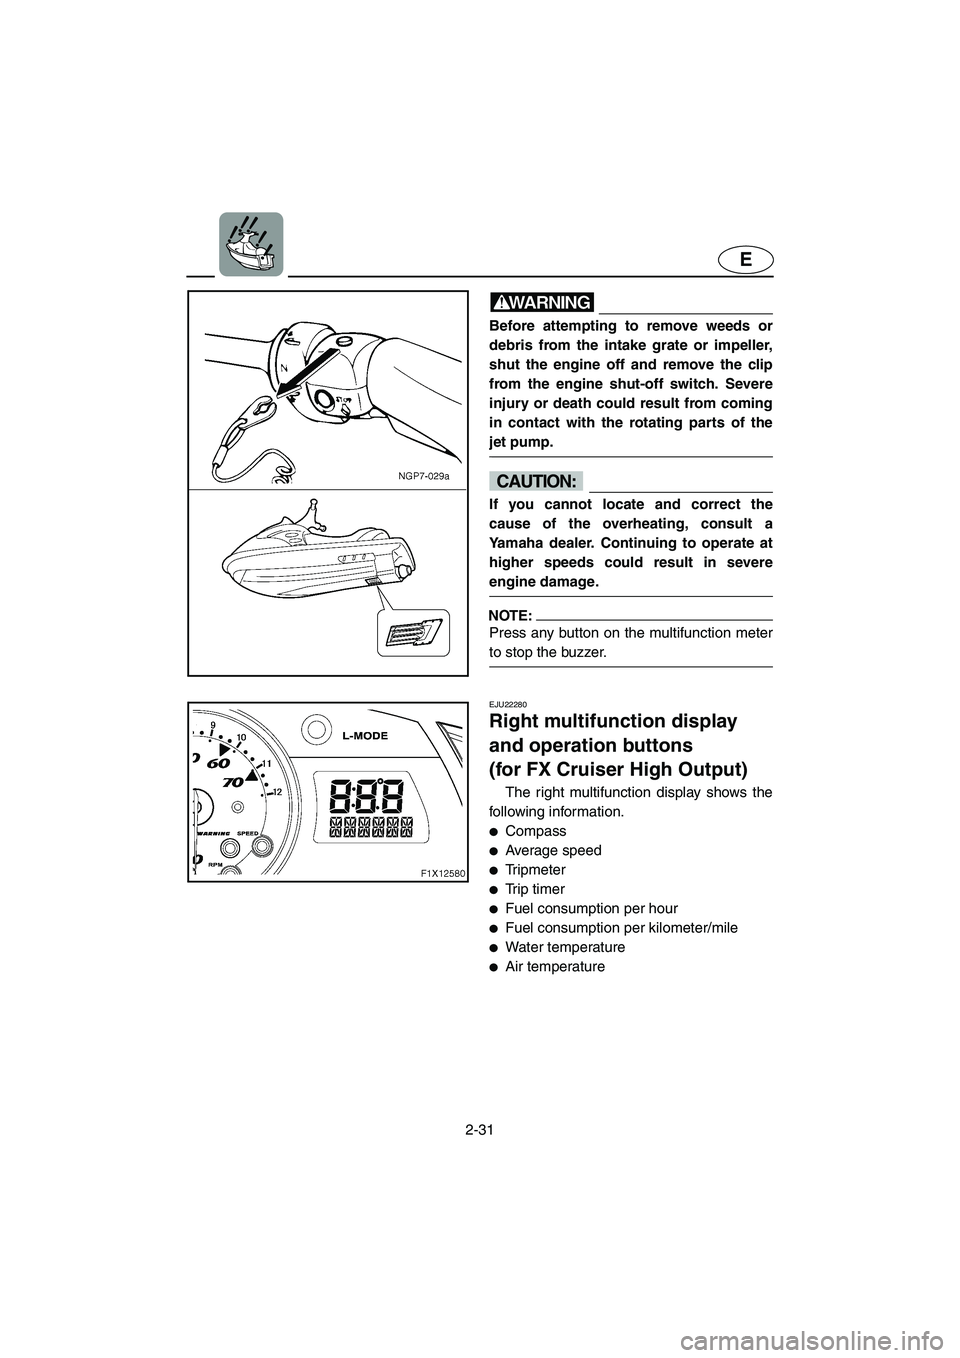 YAMAHA FX HO 2006 Workshop Manual 2-31
E
WARNING@ Before attempting to remove weeds or
debris from the intake grate or impeller,
shut the engine off and remove the clip
from the engine shut-off switch. Severe
injury or death could res